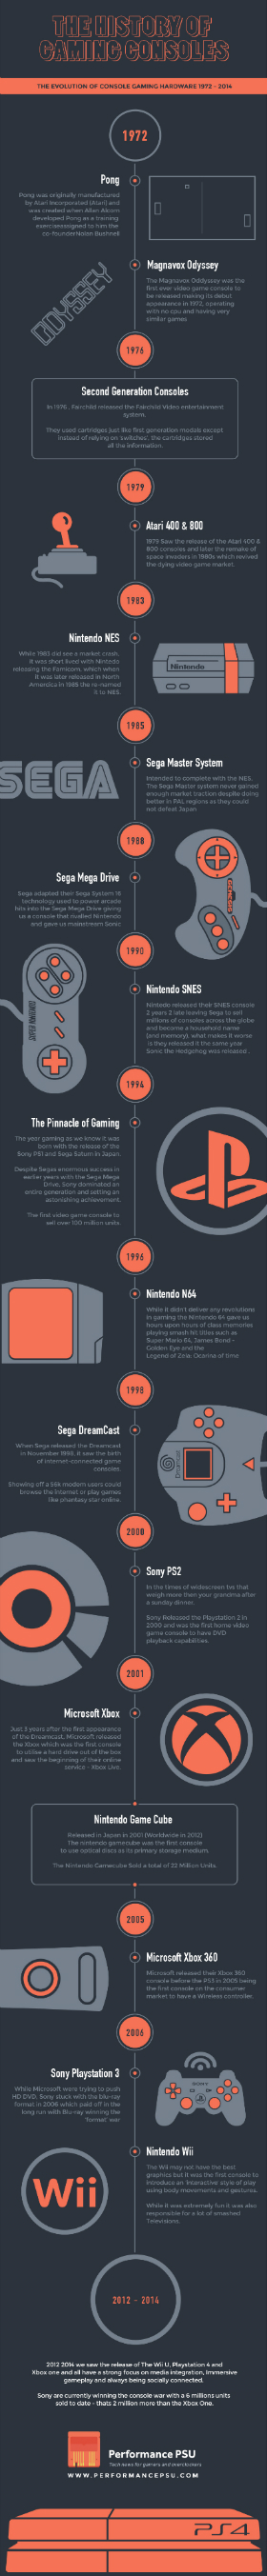 The History of Video Gaming Consoles 1972 – 2014